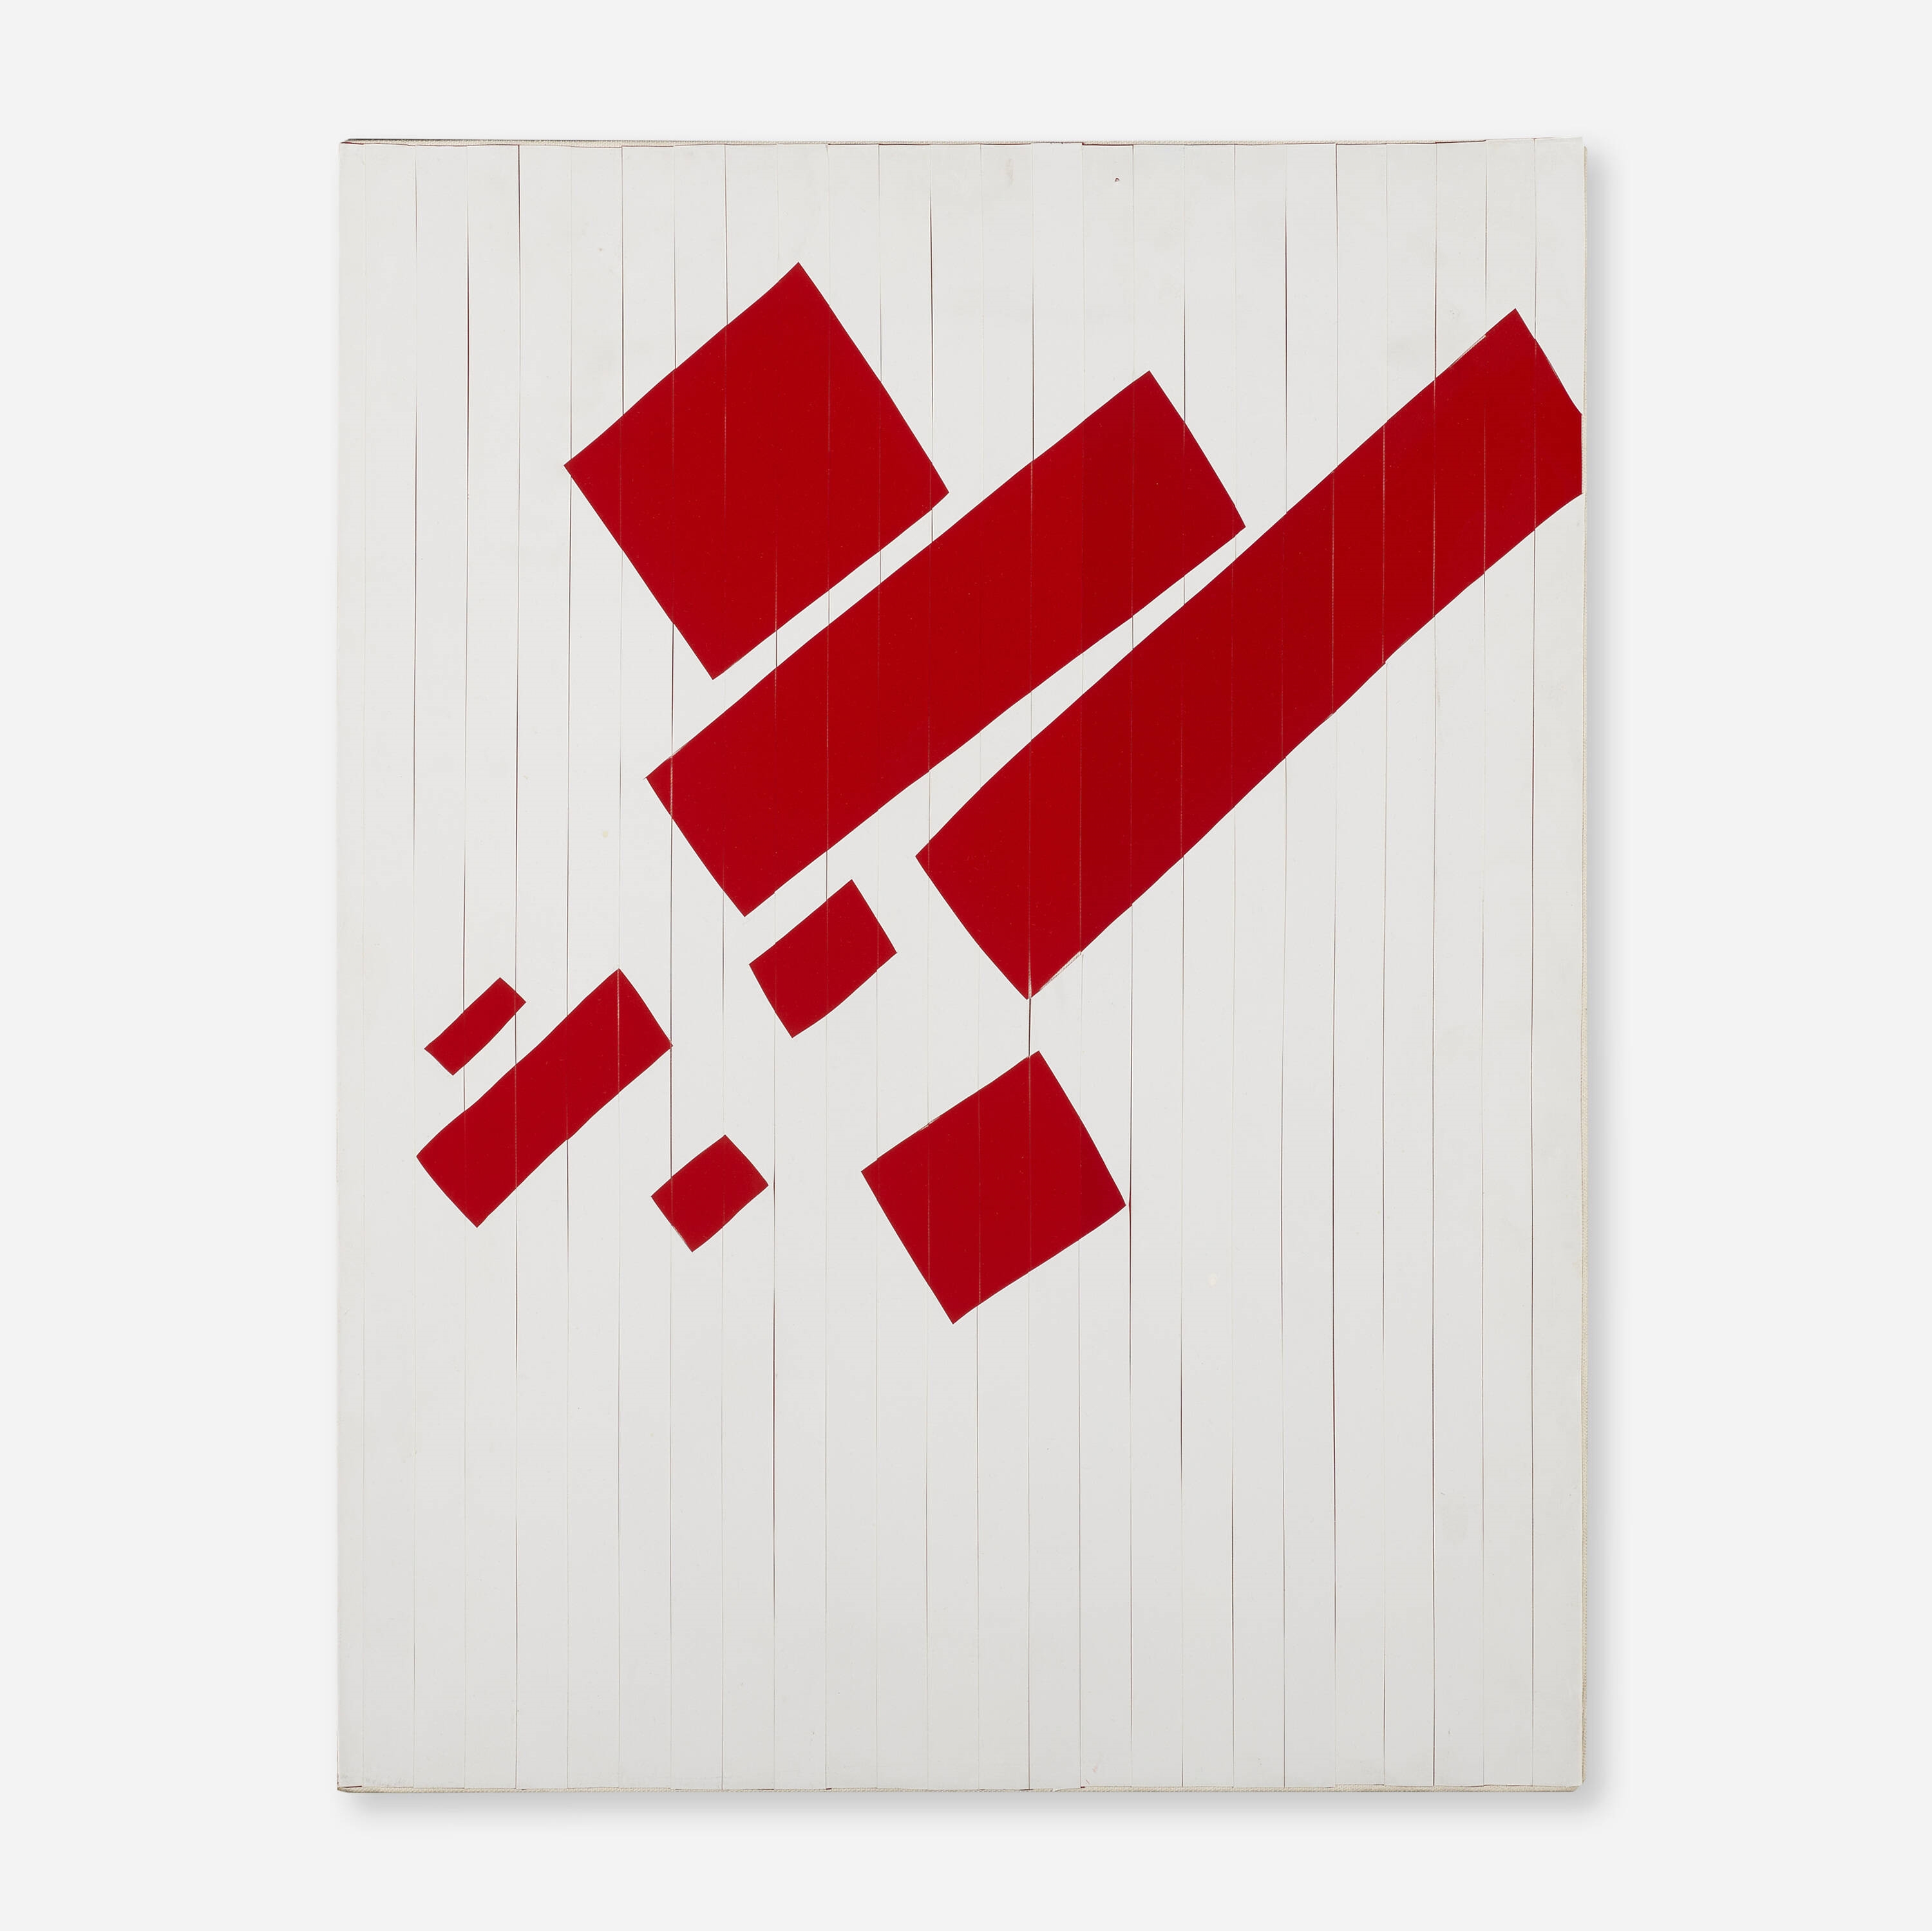 Artwork by Jason Pickleman, Another Eight Red Rectangles, Made of acrylic tape on canvas